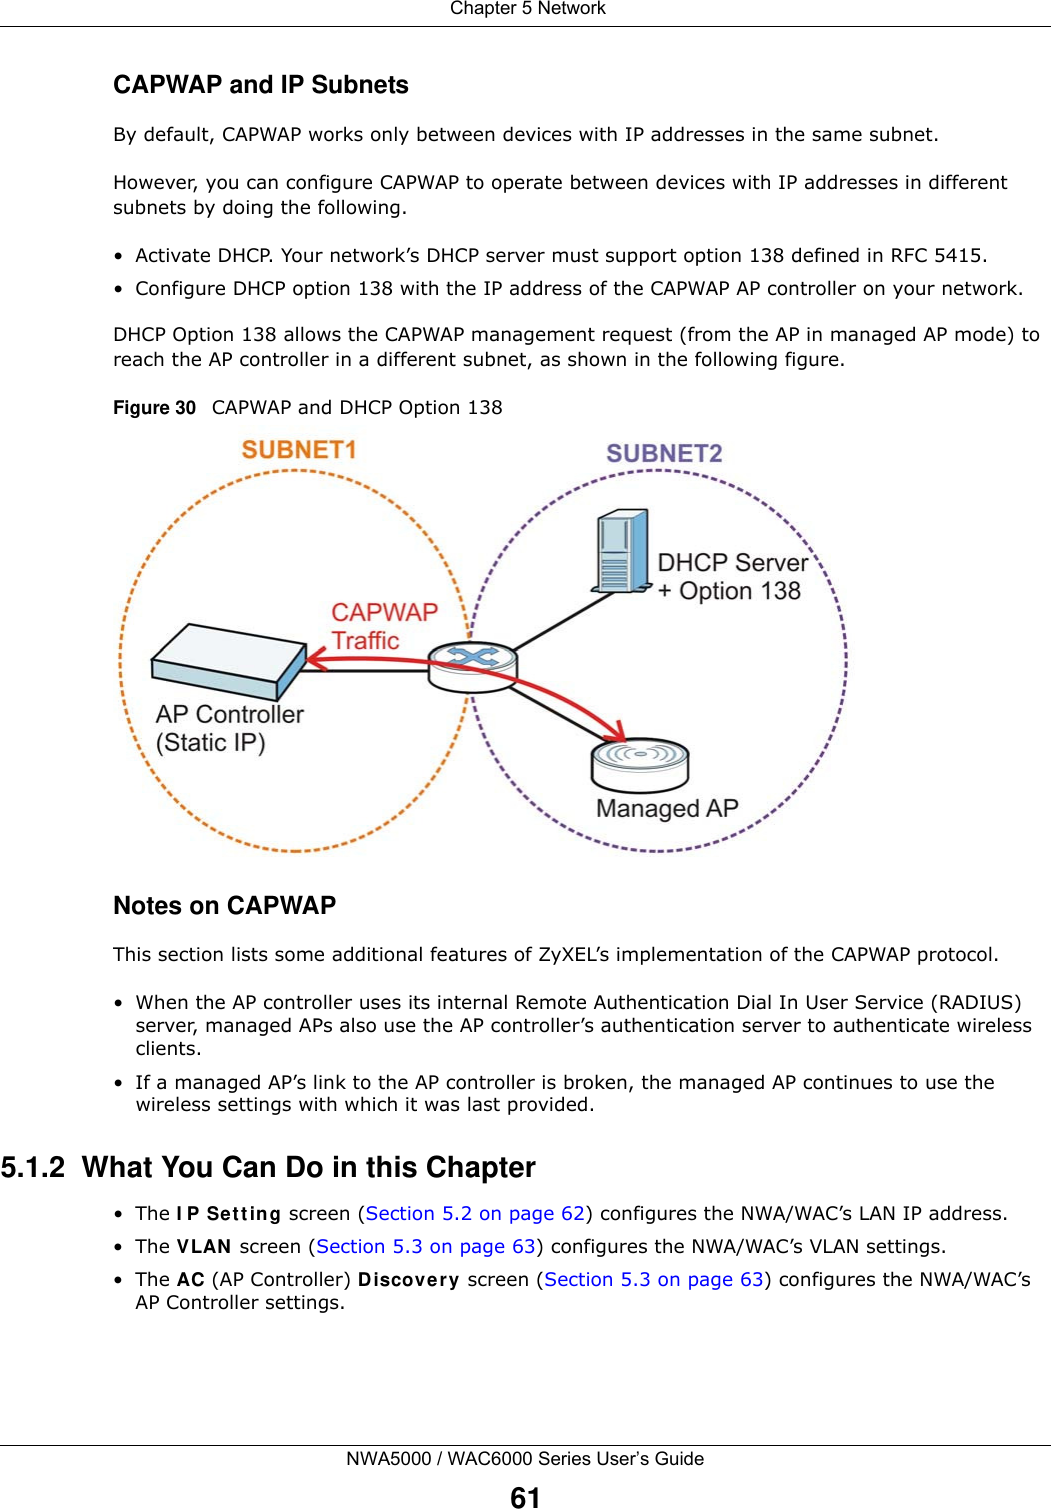  Chapter 5 NetworkNWA5000 / WAC6000 Series User’s Guide61CAPWAP and IP SubnetsBy default, CAPWAP works only between devices with IP addresses in the same subnet. However, you can configure CAPWAP to operate between devices with IP addresses in different subnets by doing the following.• Activate DHCP. Your network’s DHCP server must support option 138 defined in RFC 5415.• Configure DHCP option 138 with the IP address of the CAPWAP AP controller on your network.DHCP Option 138 allows the CAPWAP management request (from the AP in managed AP mode) to reach the AP controller in a different subnet, as shown in the following figure.Figure 30   CAPWAP and DHCP Option 138 Notes on CAPWAPThis section lists some additional features of ZyXEL’s implementation of the CAPWAP protocol.• When the AP controller uses its internal Remote Authentication Dial In User Service (RADIUS) server, managed APs also use the AP controller’s authentication server to authenticate wireless clients.• If a managed AP’s link to the AP controller is broken, the managed AP continues to use the wireless settings with which it was last provided.5.1.2  What You Can Do in this Chapter•The IP Setting screen (Section 5.2 on page 62) configures the NWA/WAC’s LAN IP address. •The VLAN screen (Section 5.3 on page 63) configures the NWA/WAC’s VLAN settings. •The AC (AP Controller) Discovery screen (Section 5.3 on page 63) configures the NWA/WAC’s AP Controller settings.